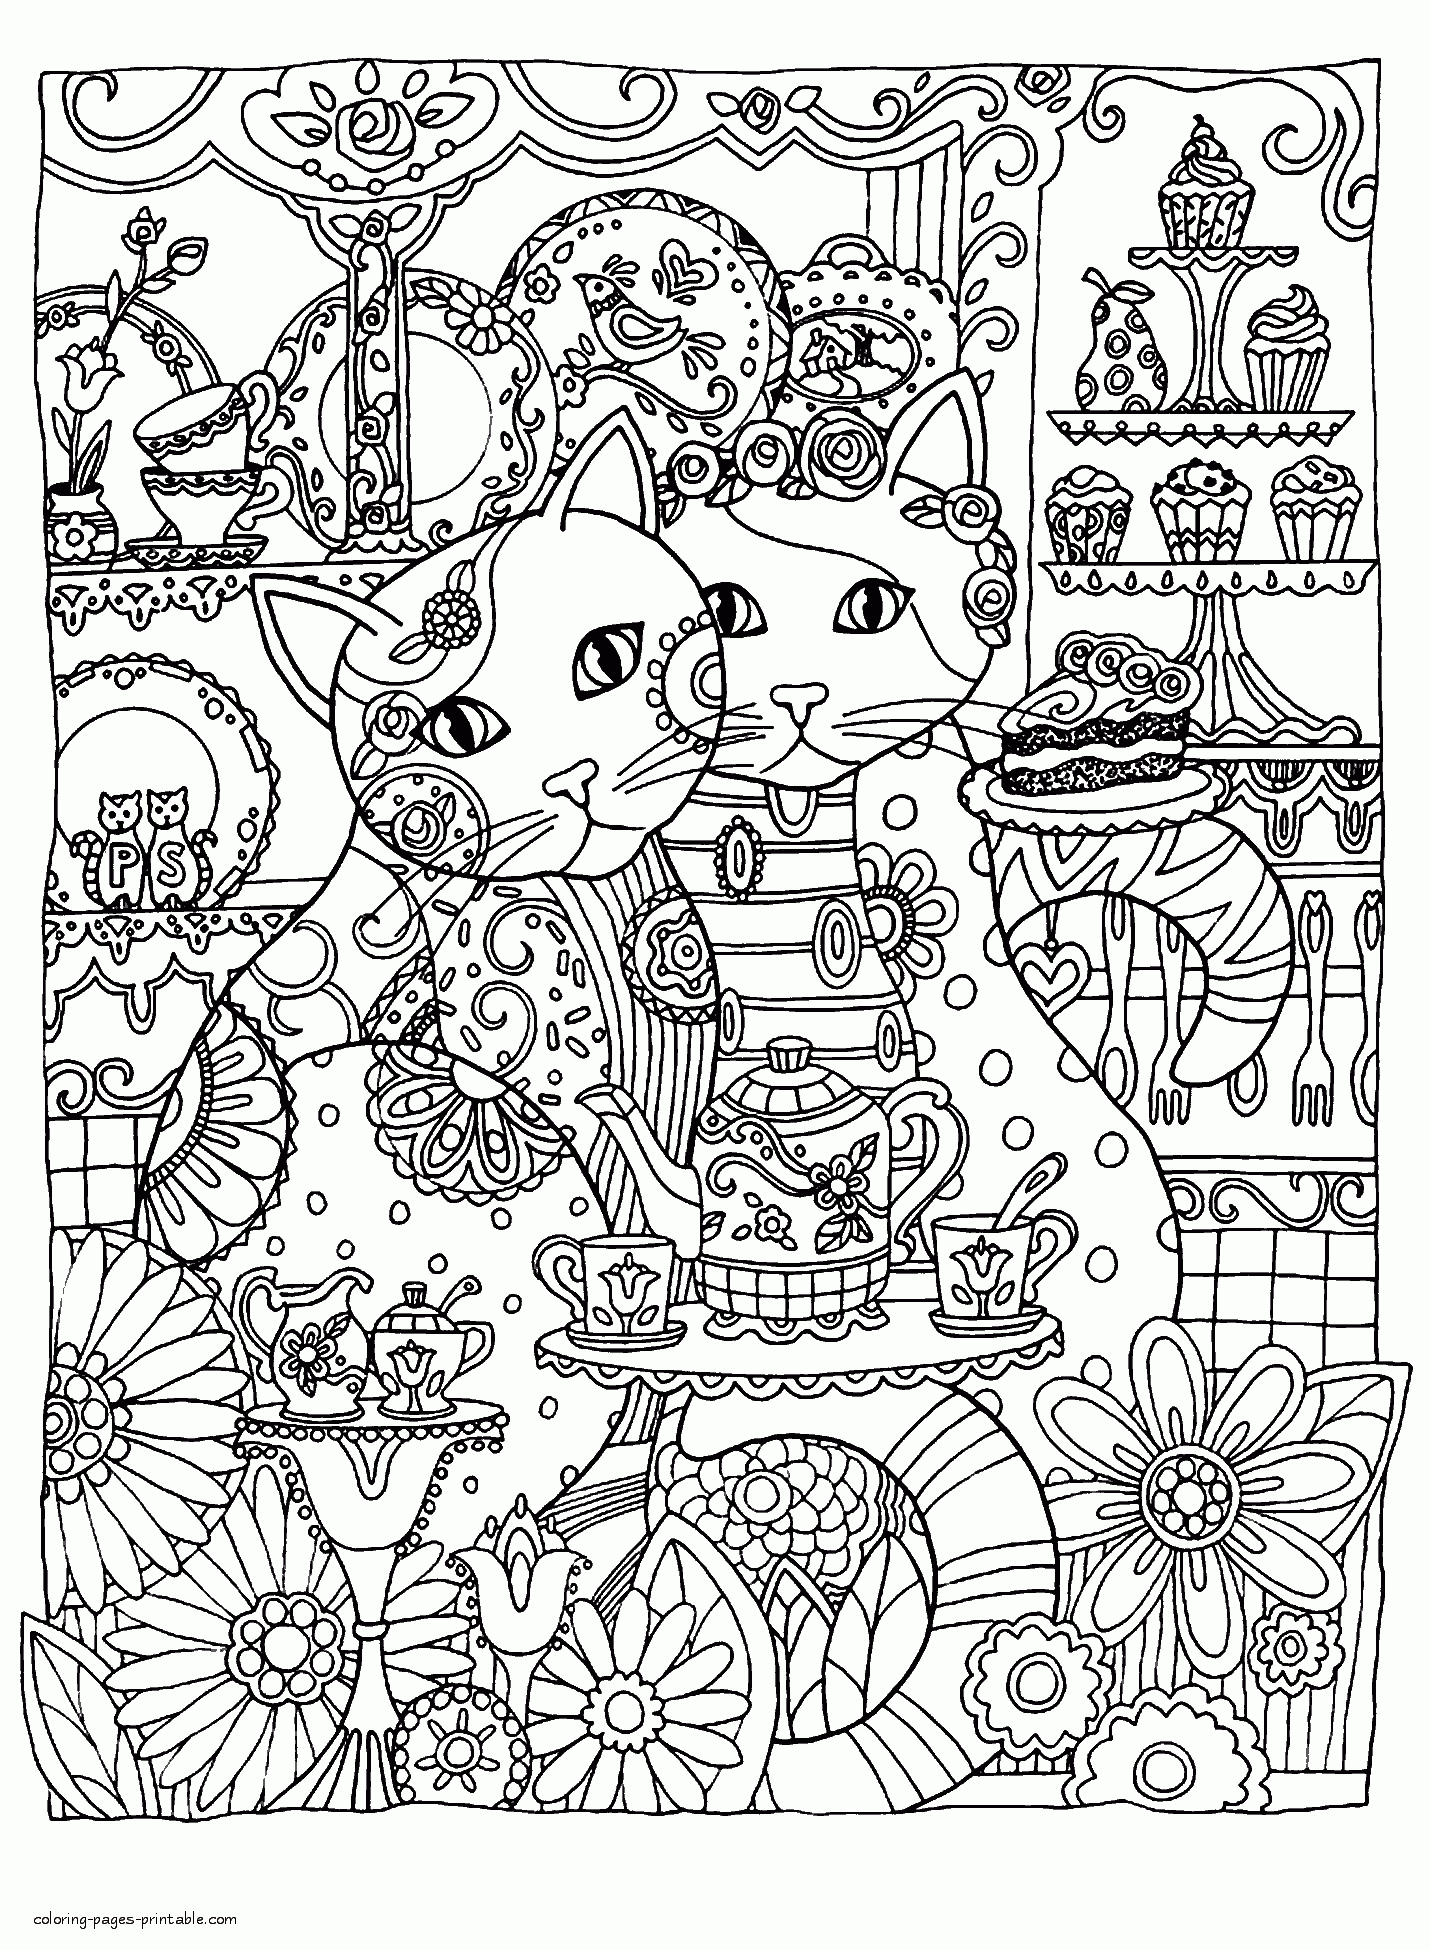 a pair of a cats coloring page coloring pages printable com